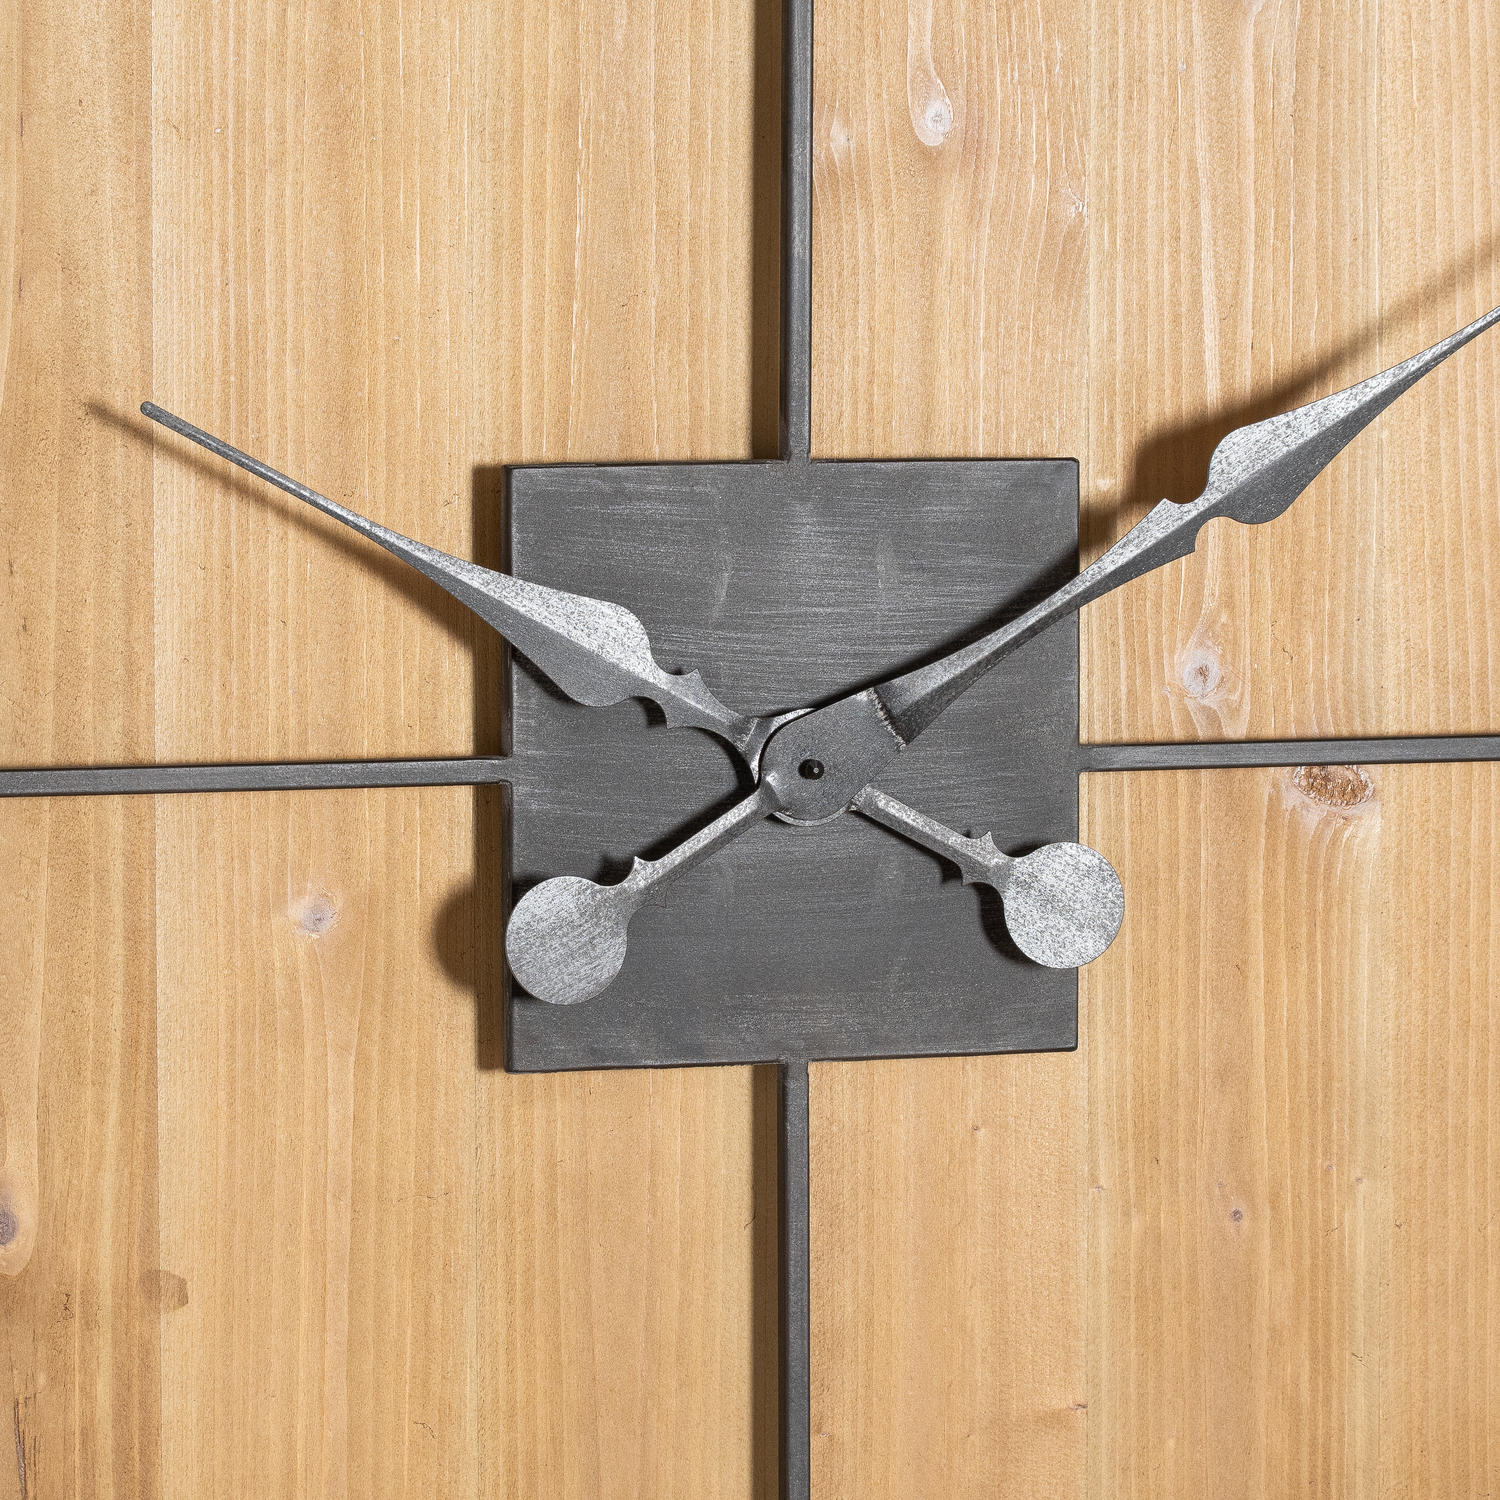 Williston Square Large Wooden Wall Clock - Image 3